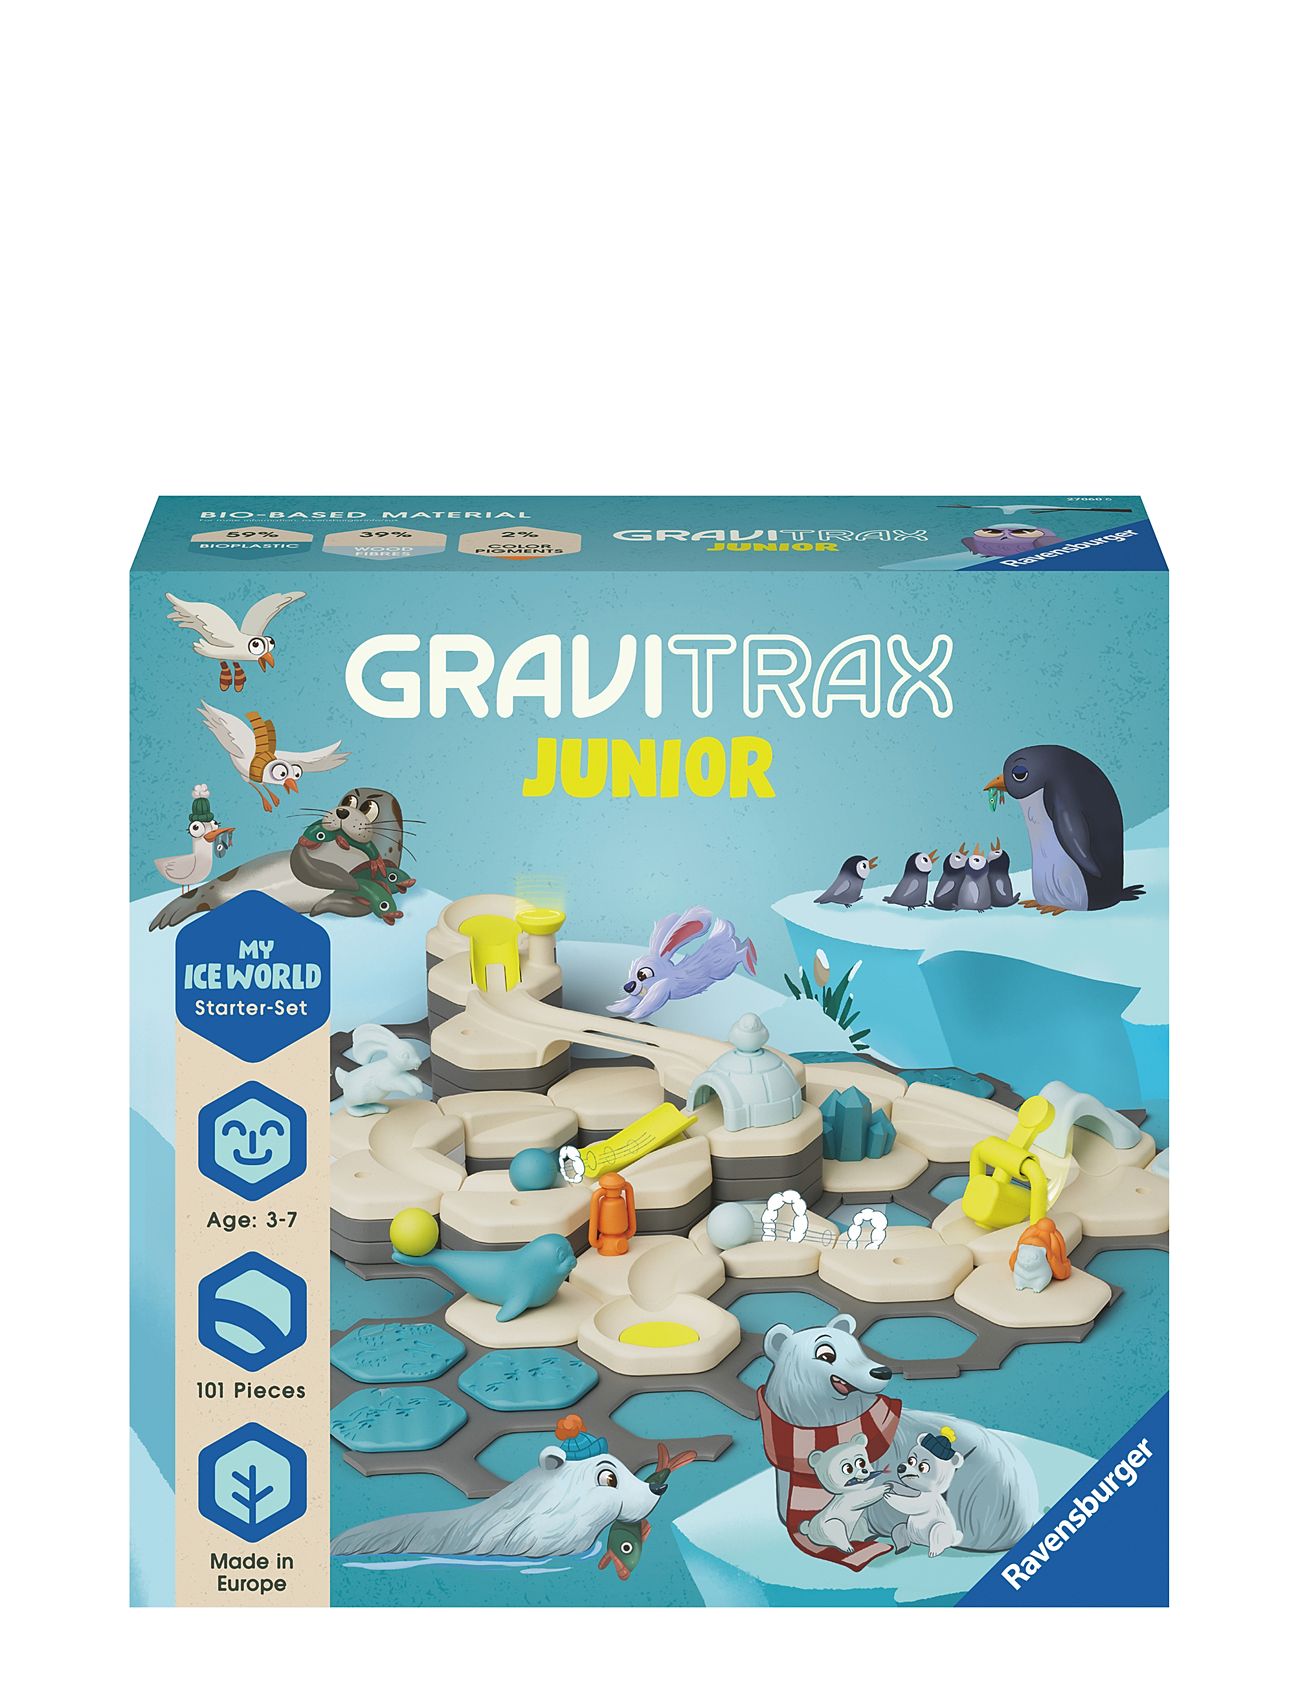 Gravitrax Junior Starter-Set Ice Toys Puzzles And Games Games Board Games Multi/patterned Ravensburger